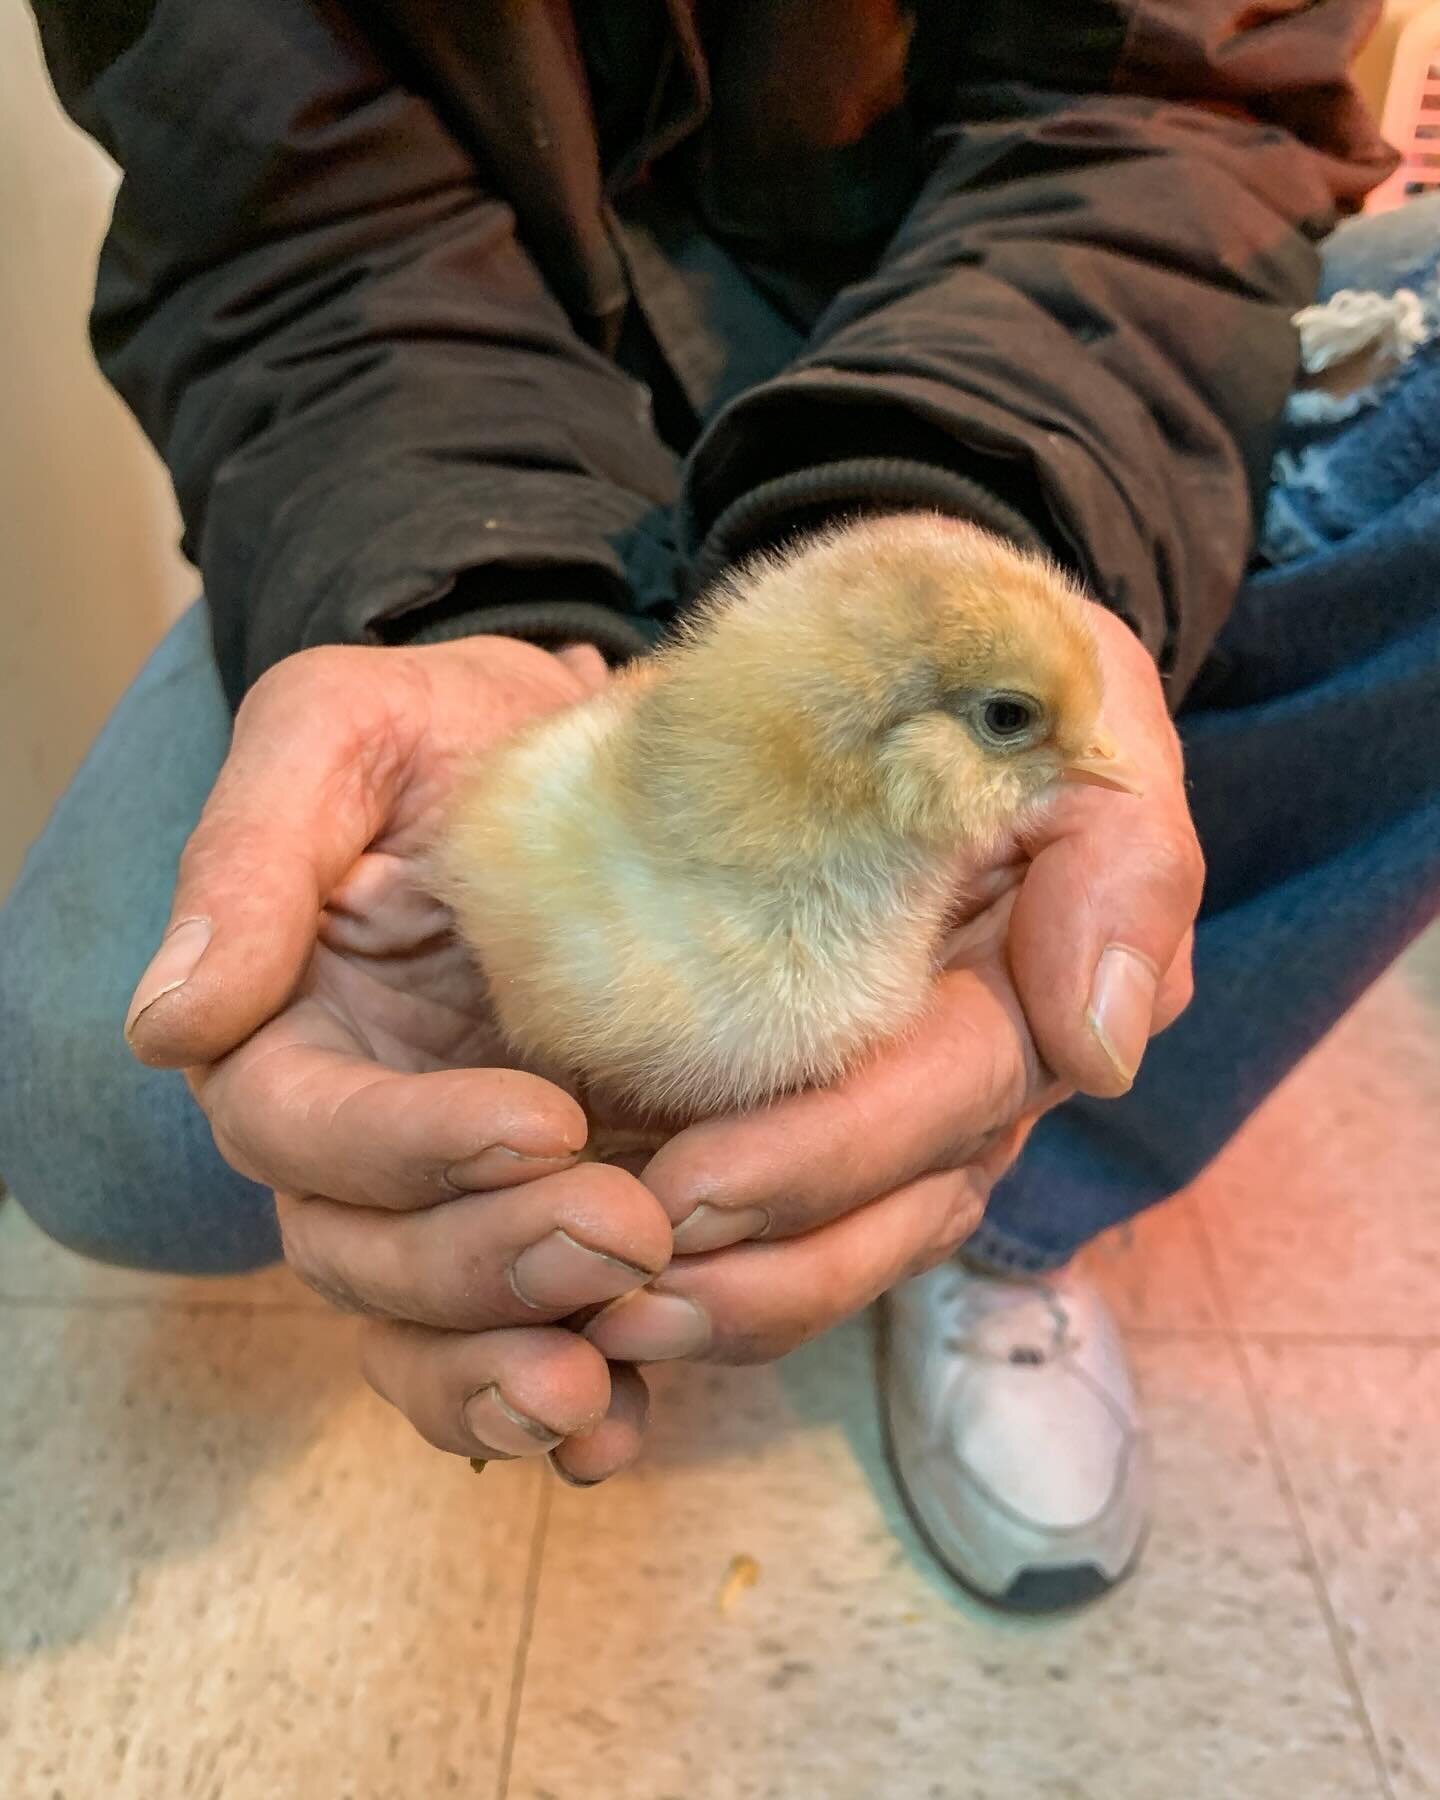 Our 1st batch of 🐣baby chicks🐣 have arrived!! And we have a limited few available for purchase today (all but Easter Eggers)! Come on in and say hey👋🏼 to these cuties!